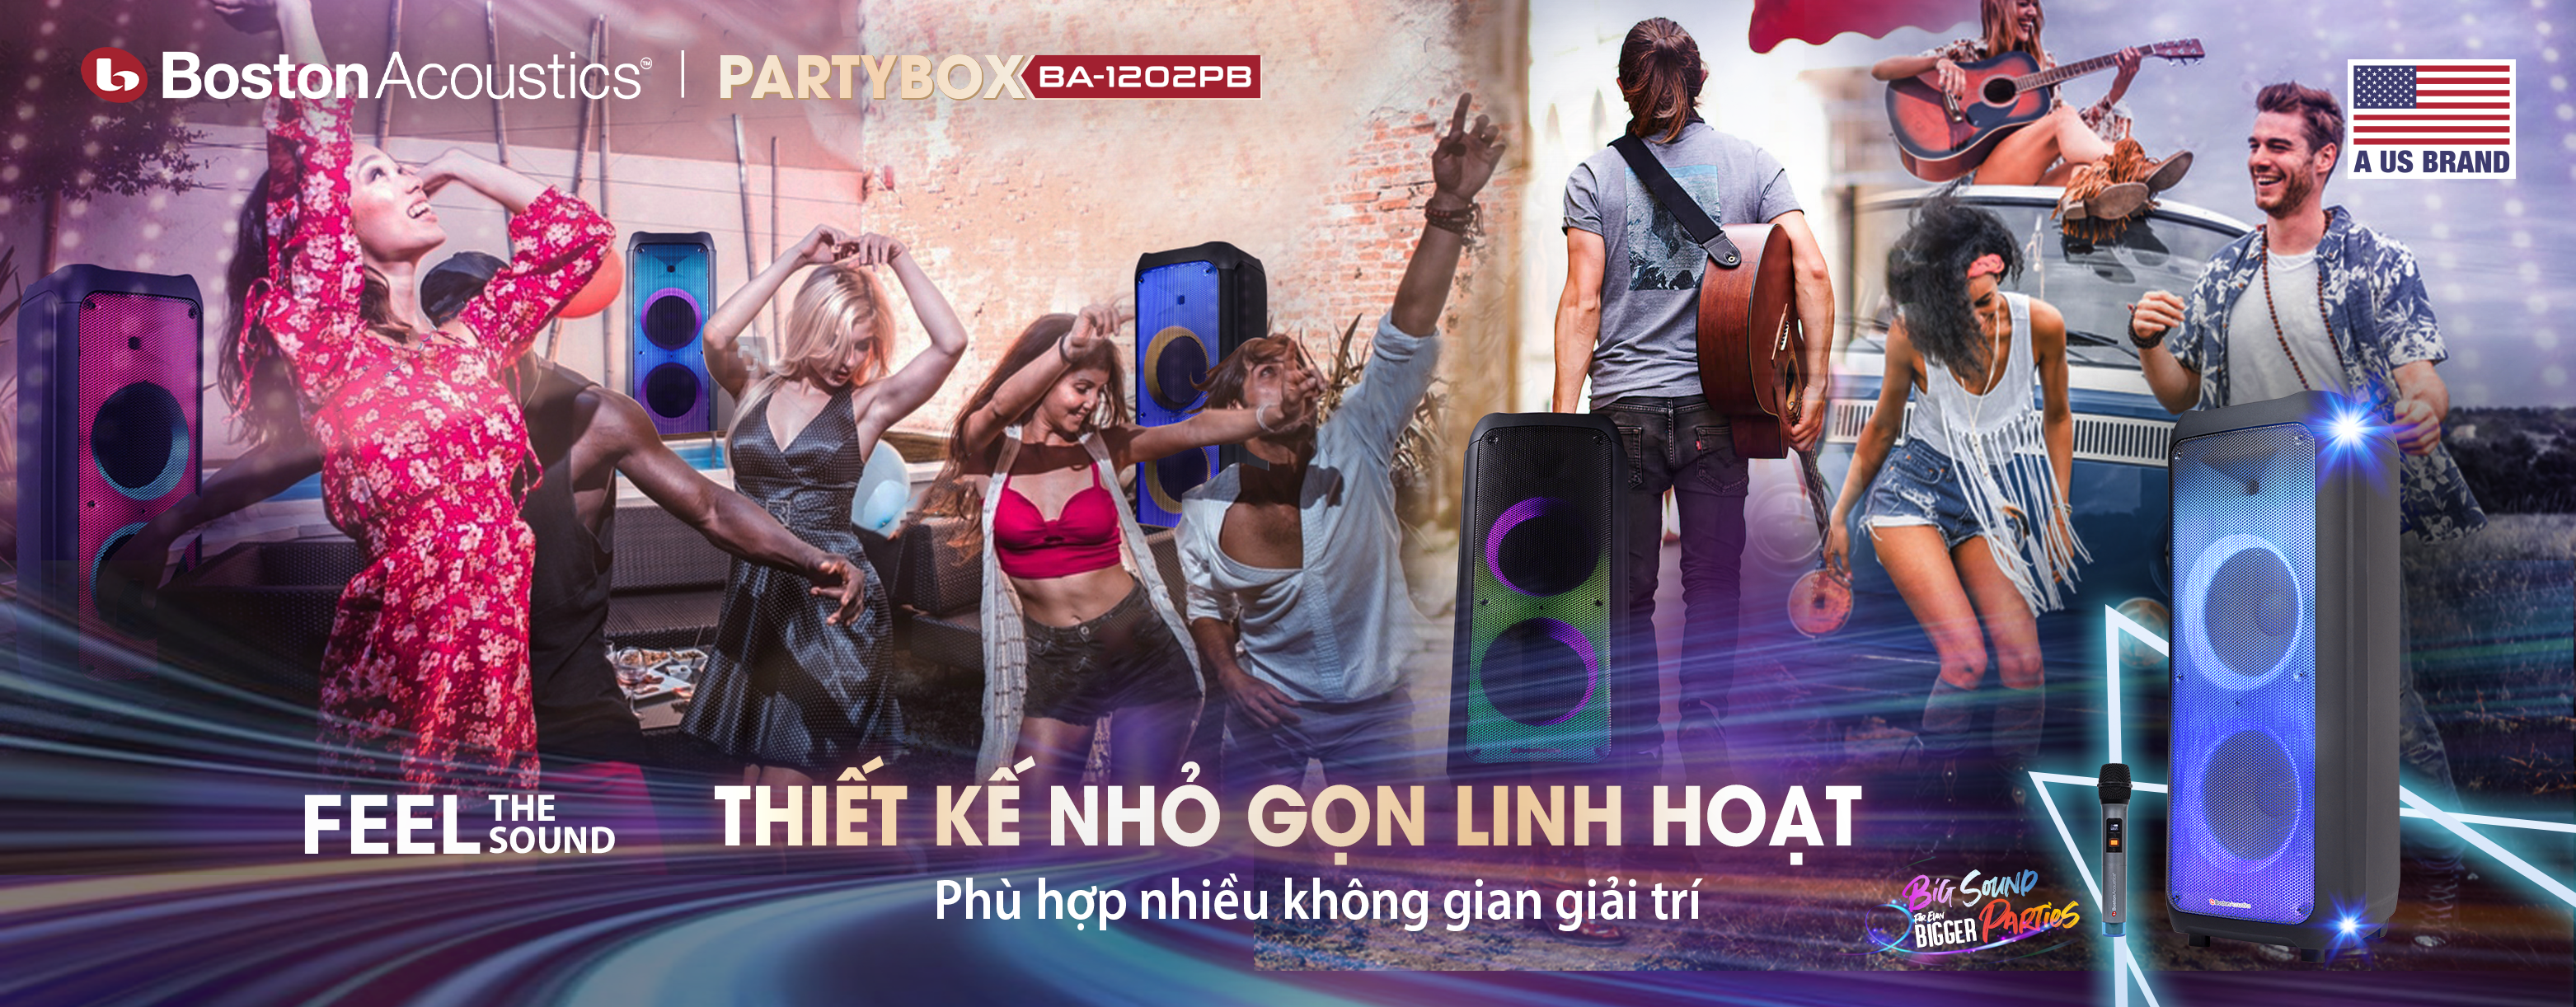 PARTYBOX BA-1202PB | Anh Duy Audio